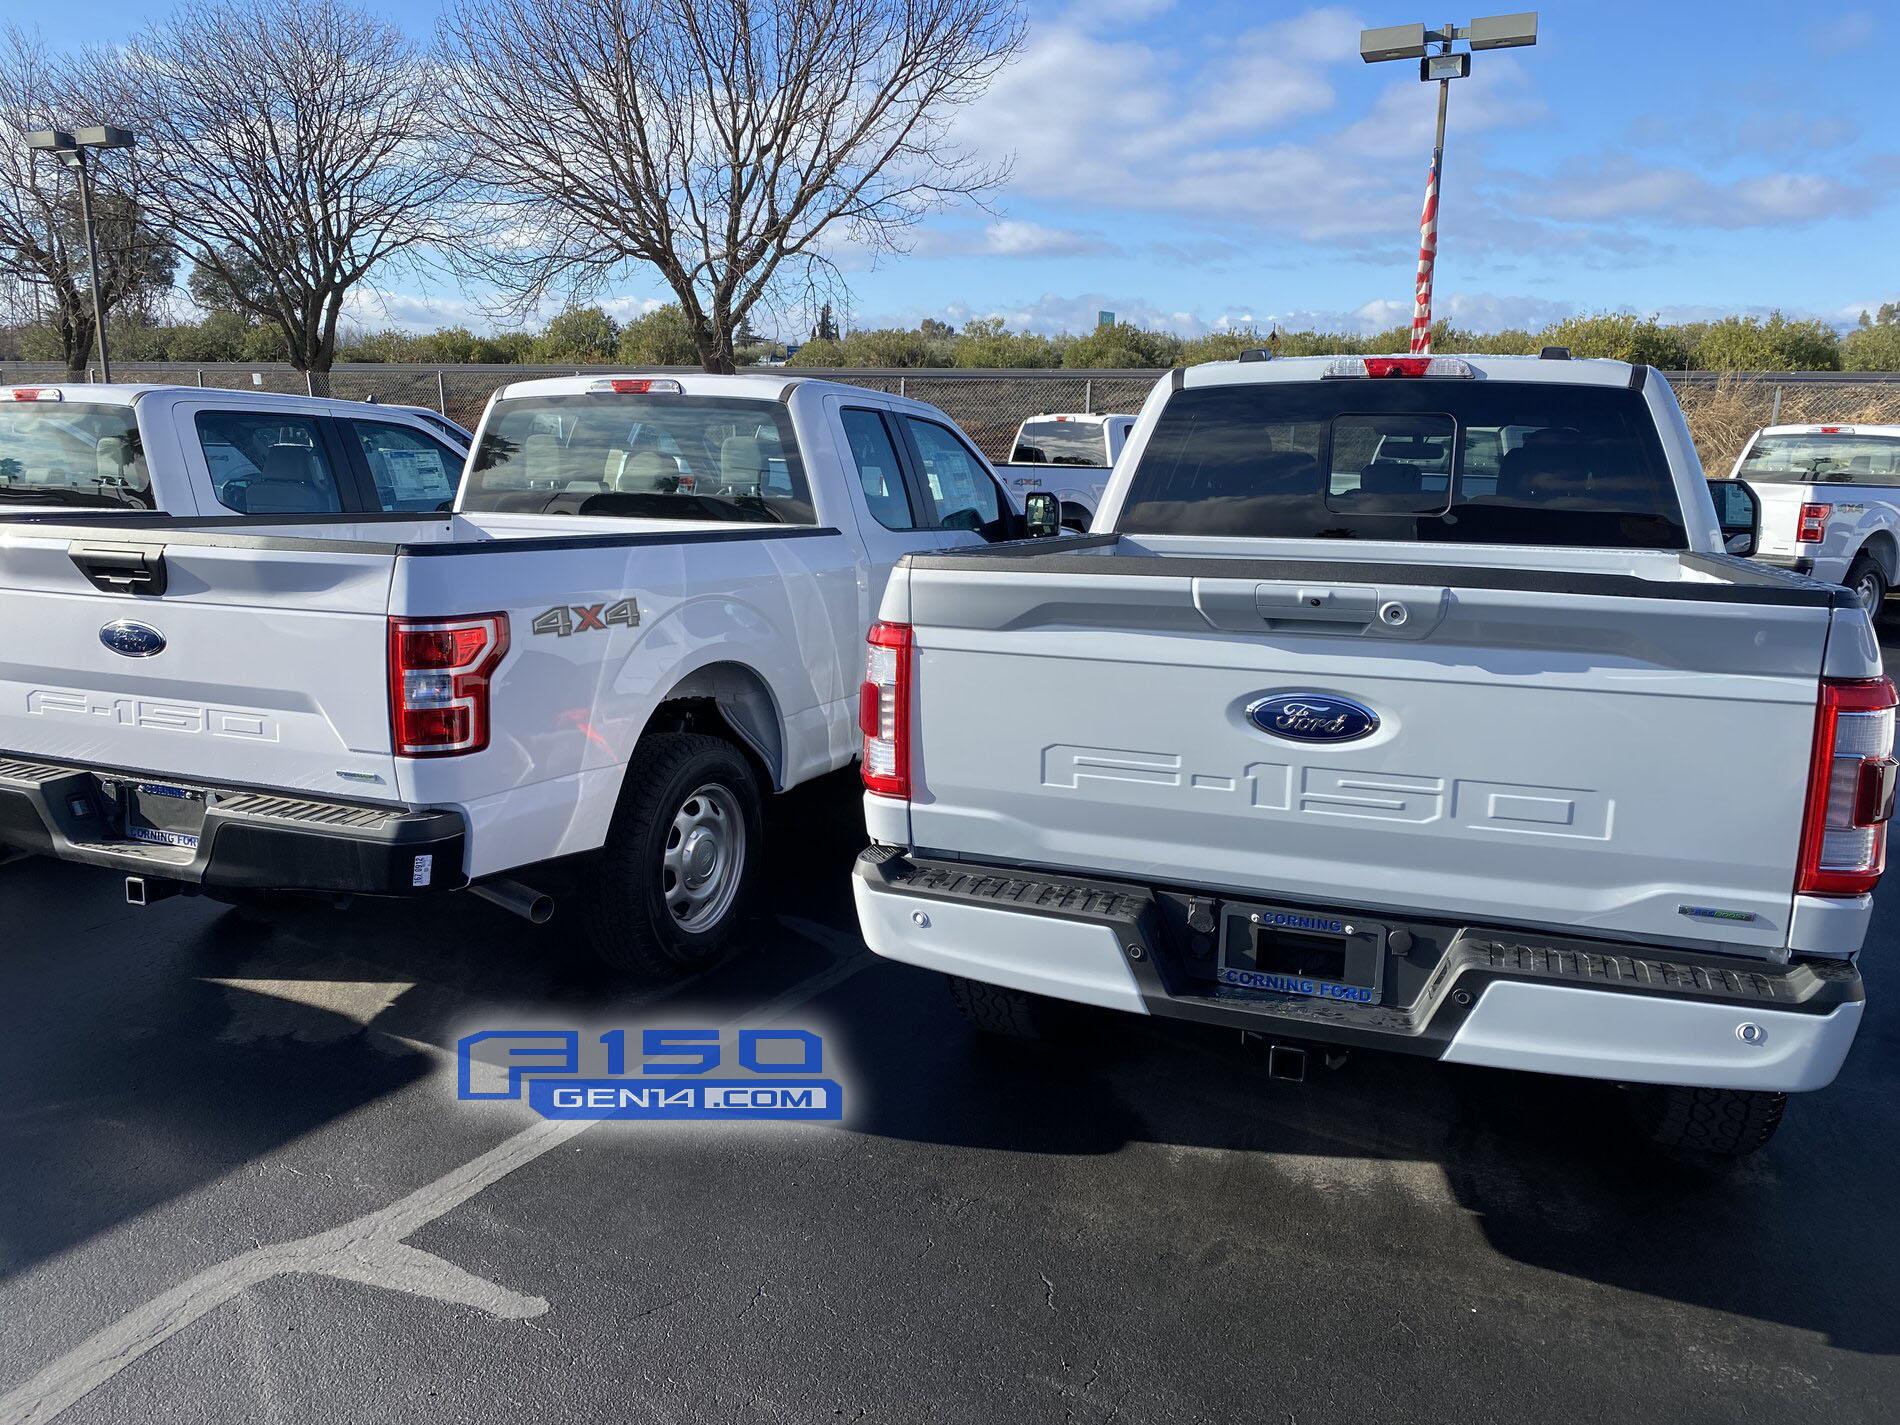 Ford F-150 Lightning Spotted: Avalanche Lightning XLT (new 2023 color) 2021 F-150 Space White vs Oxford White 1